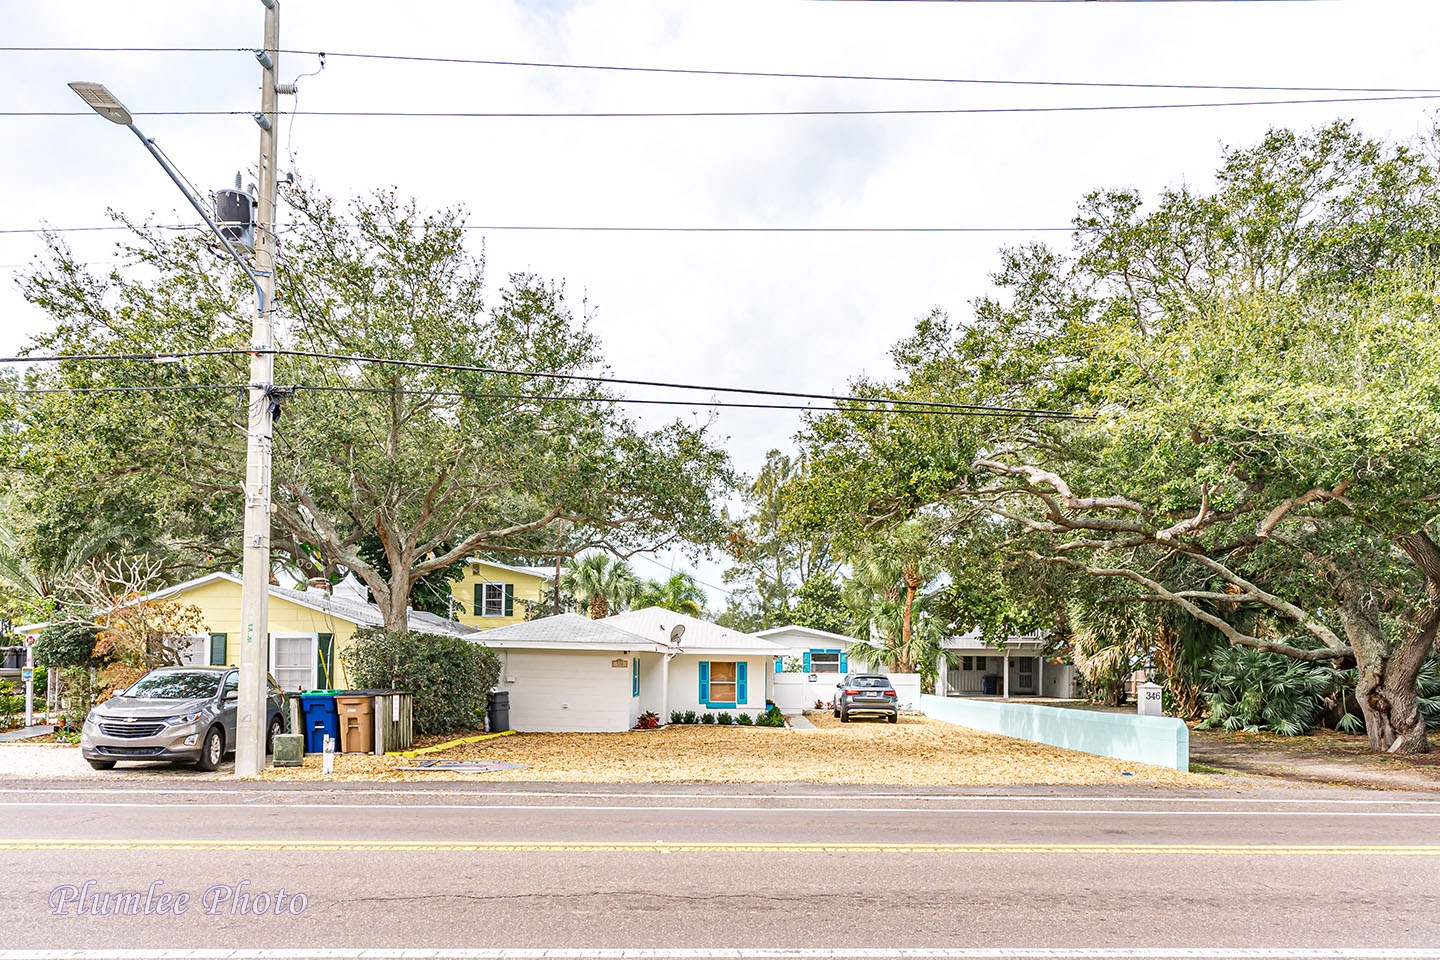 The street side of the cottage from Gulf Blvd.